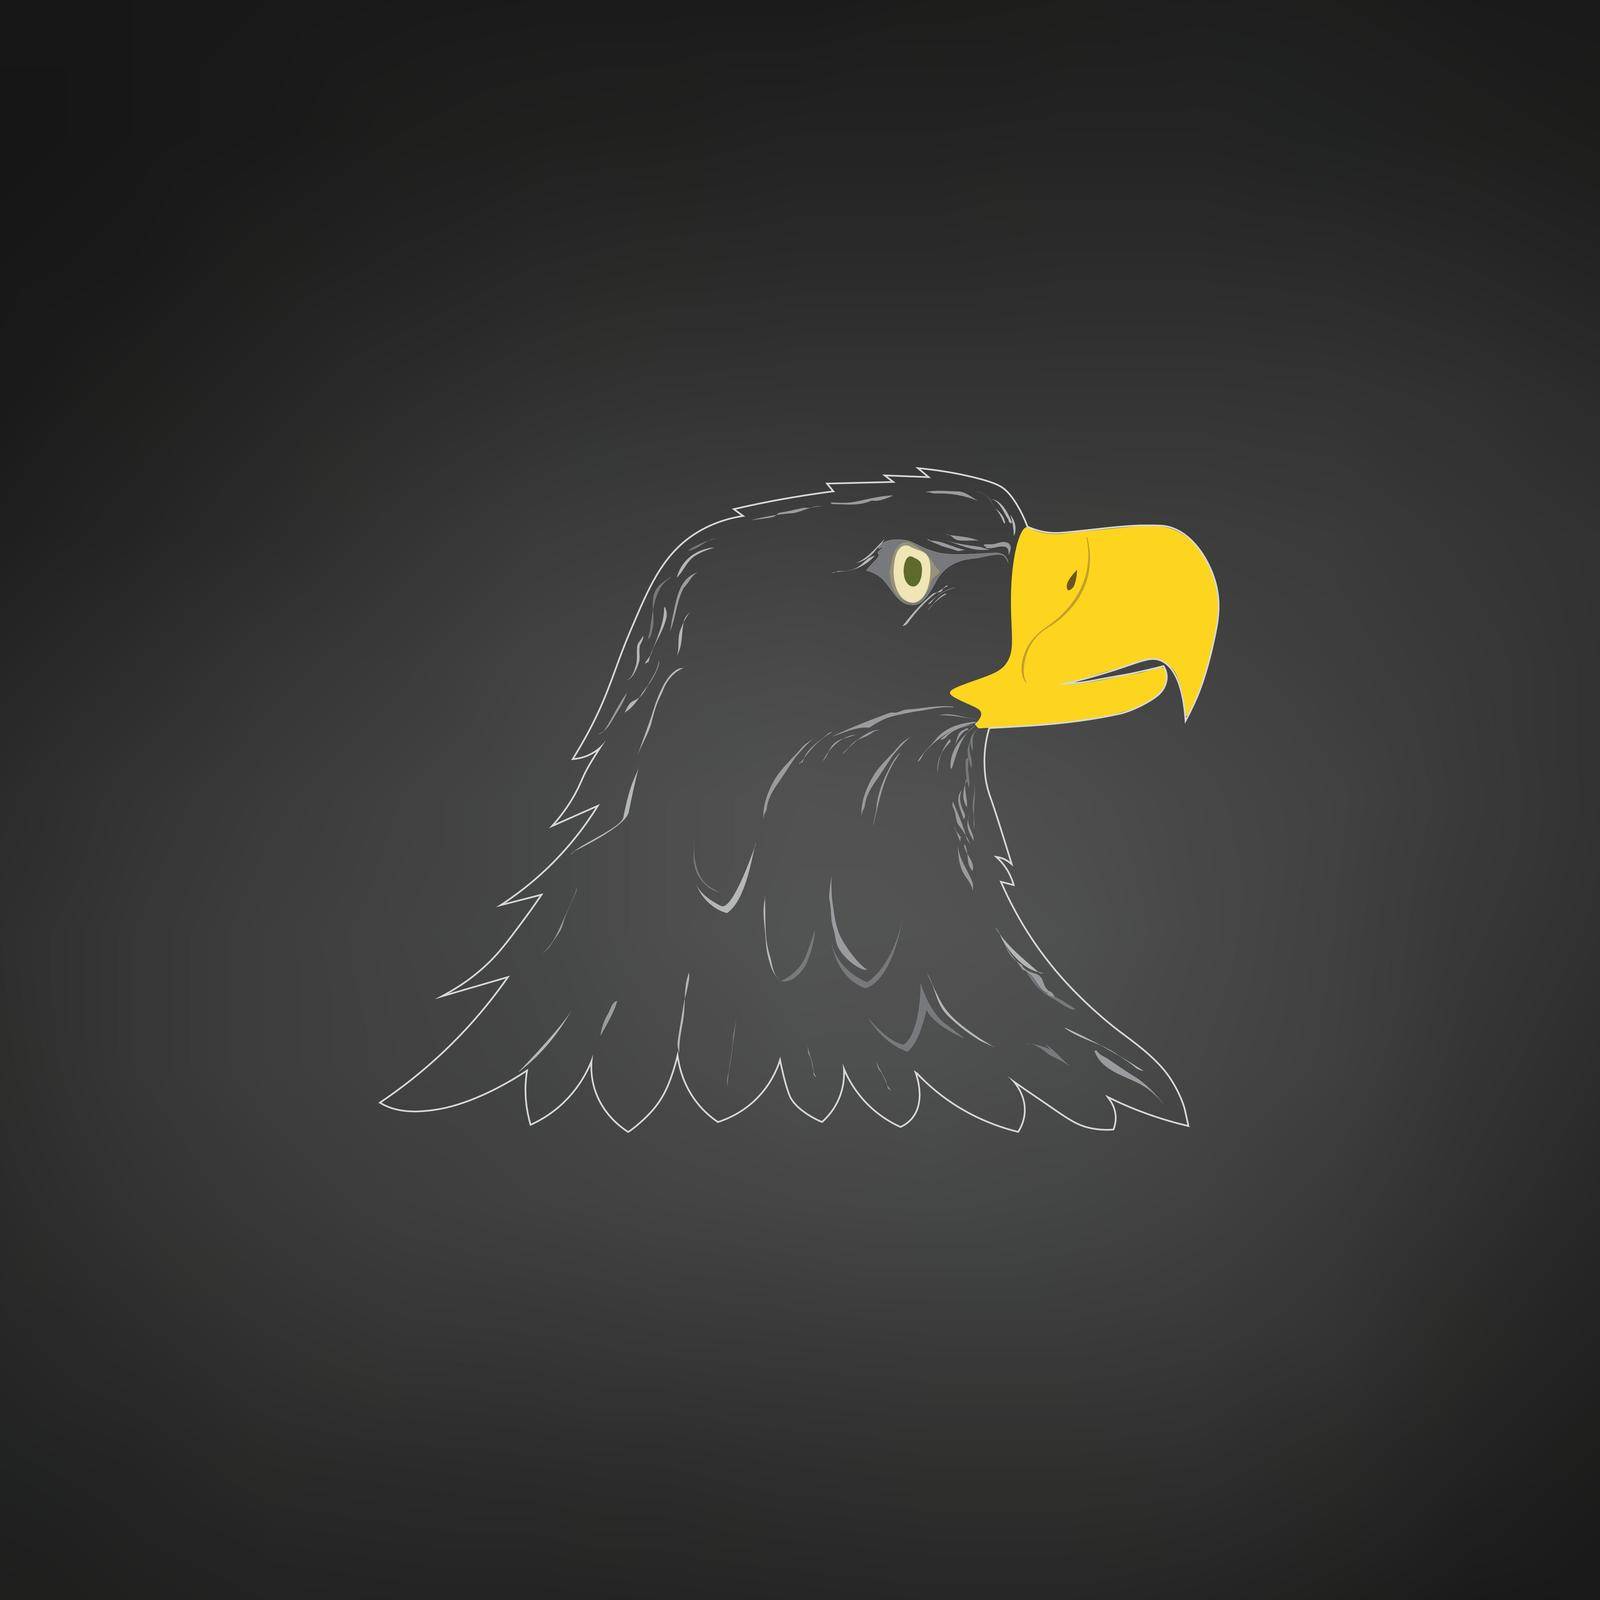 American Bald Eagle or Hawk Head Mascot Graphic, Bird facing side. T-shirt graphics. Vector illustration isolated on white background by Kyrylov